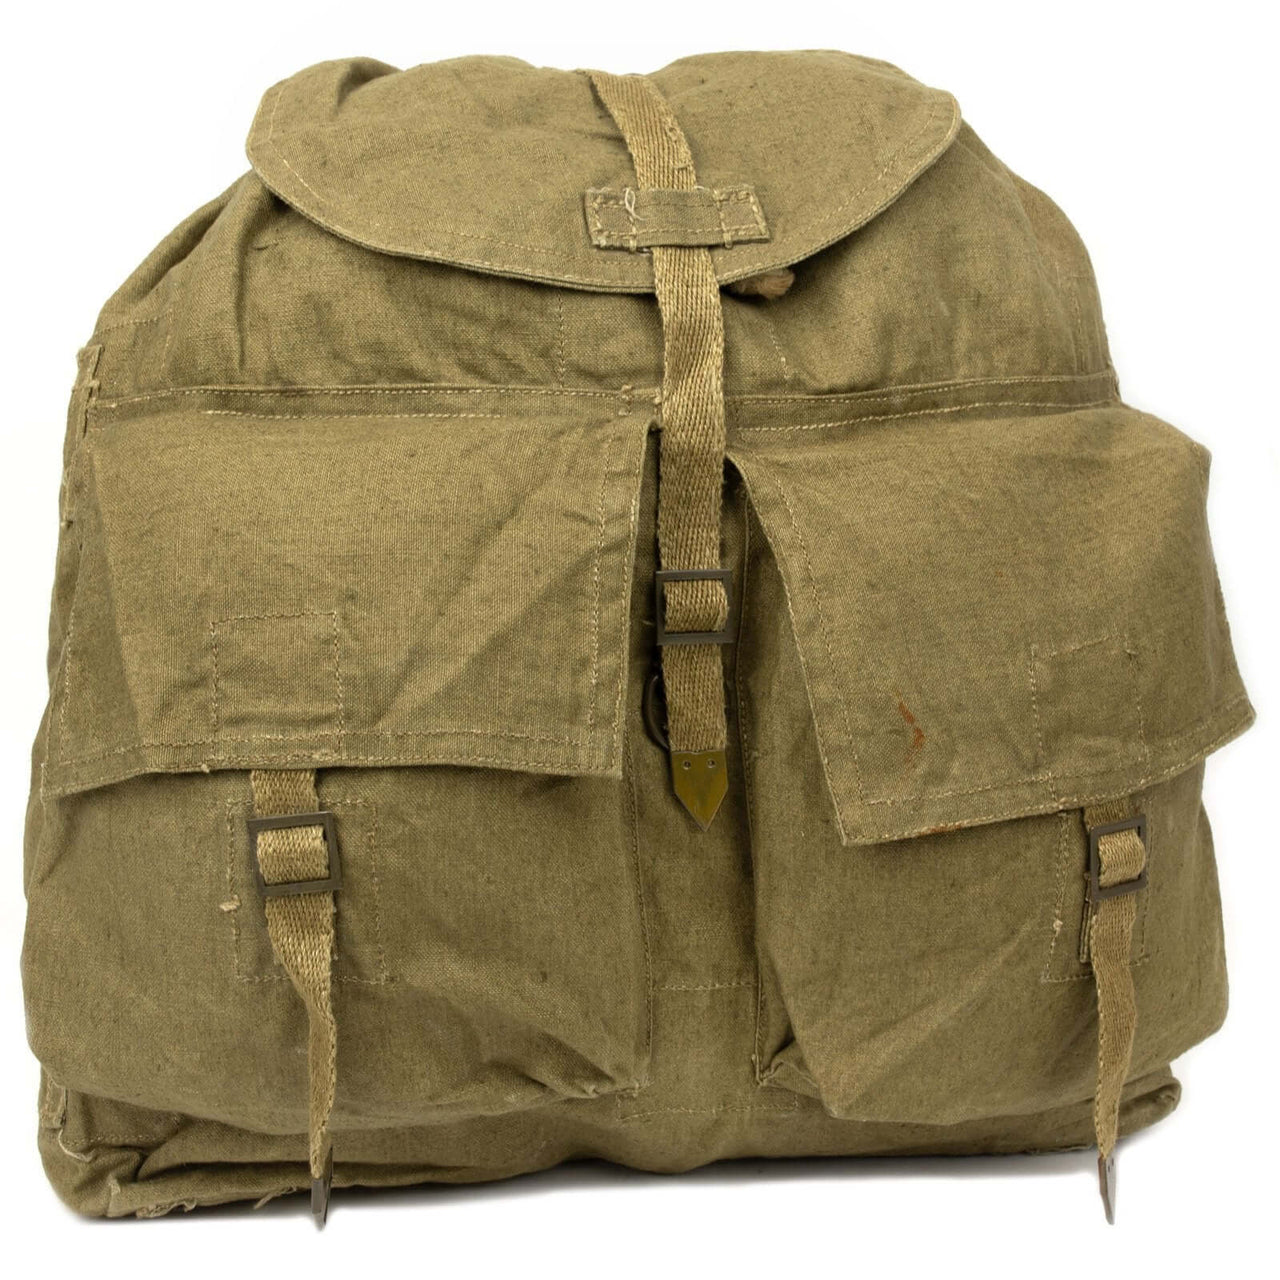 Authentic Czech Army Linen Backpack (Used)